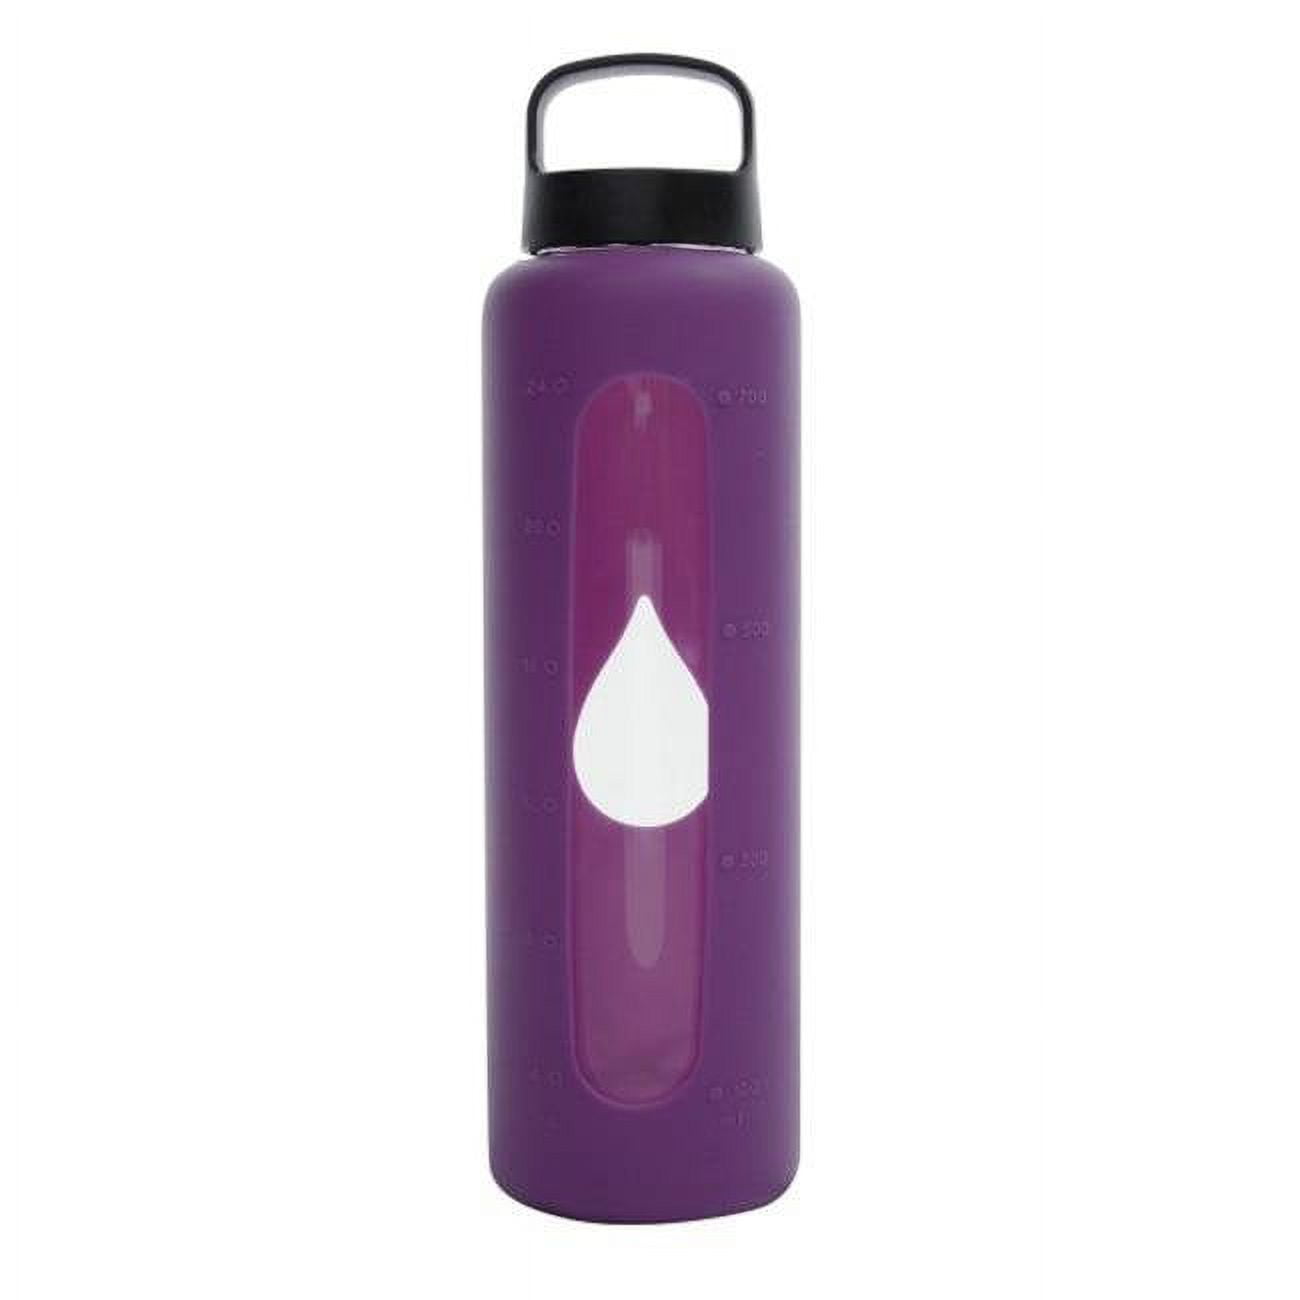 Gg150lc-purple 750ml Reusable Glass Water Bottle With Loop Cap And Free Silicone Sleeve - Iris